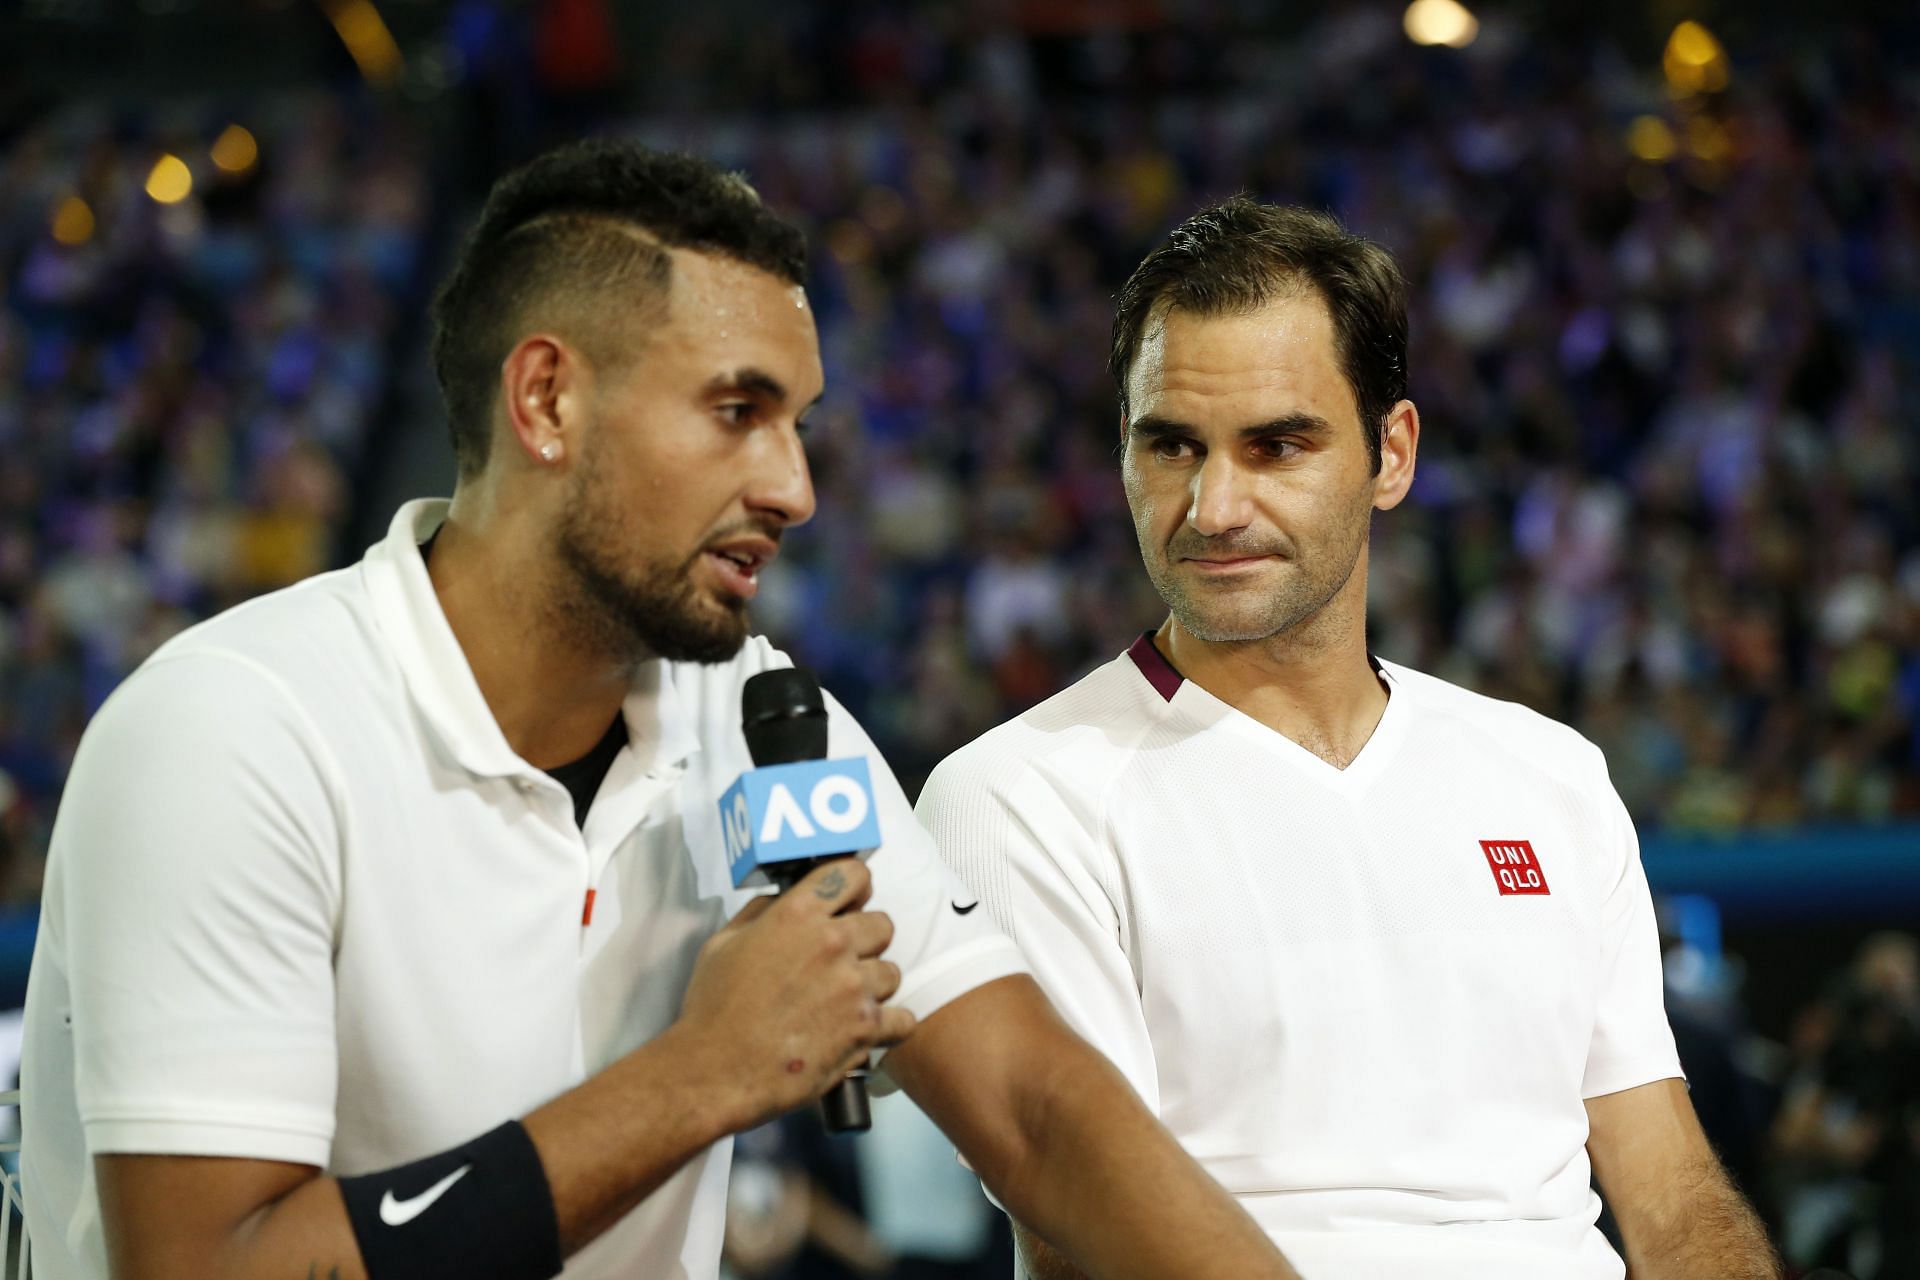 Nick Kyrgios and Roger Federer at the Rally for Relief Bushfire Appeal event in Melbourne in 2020